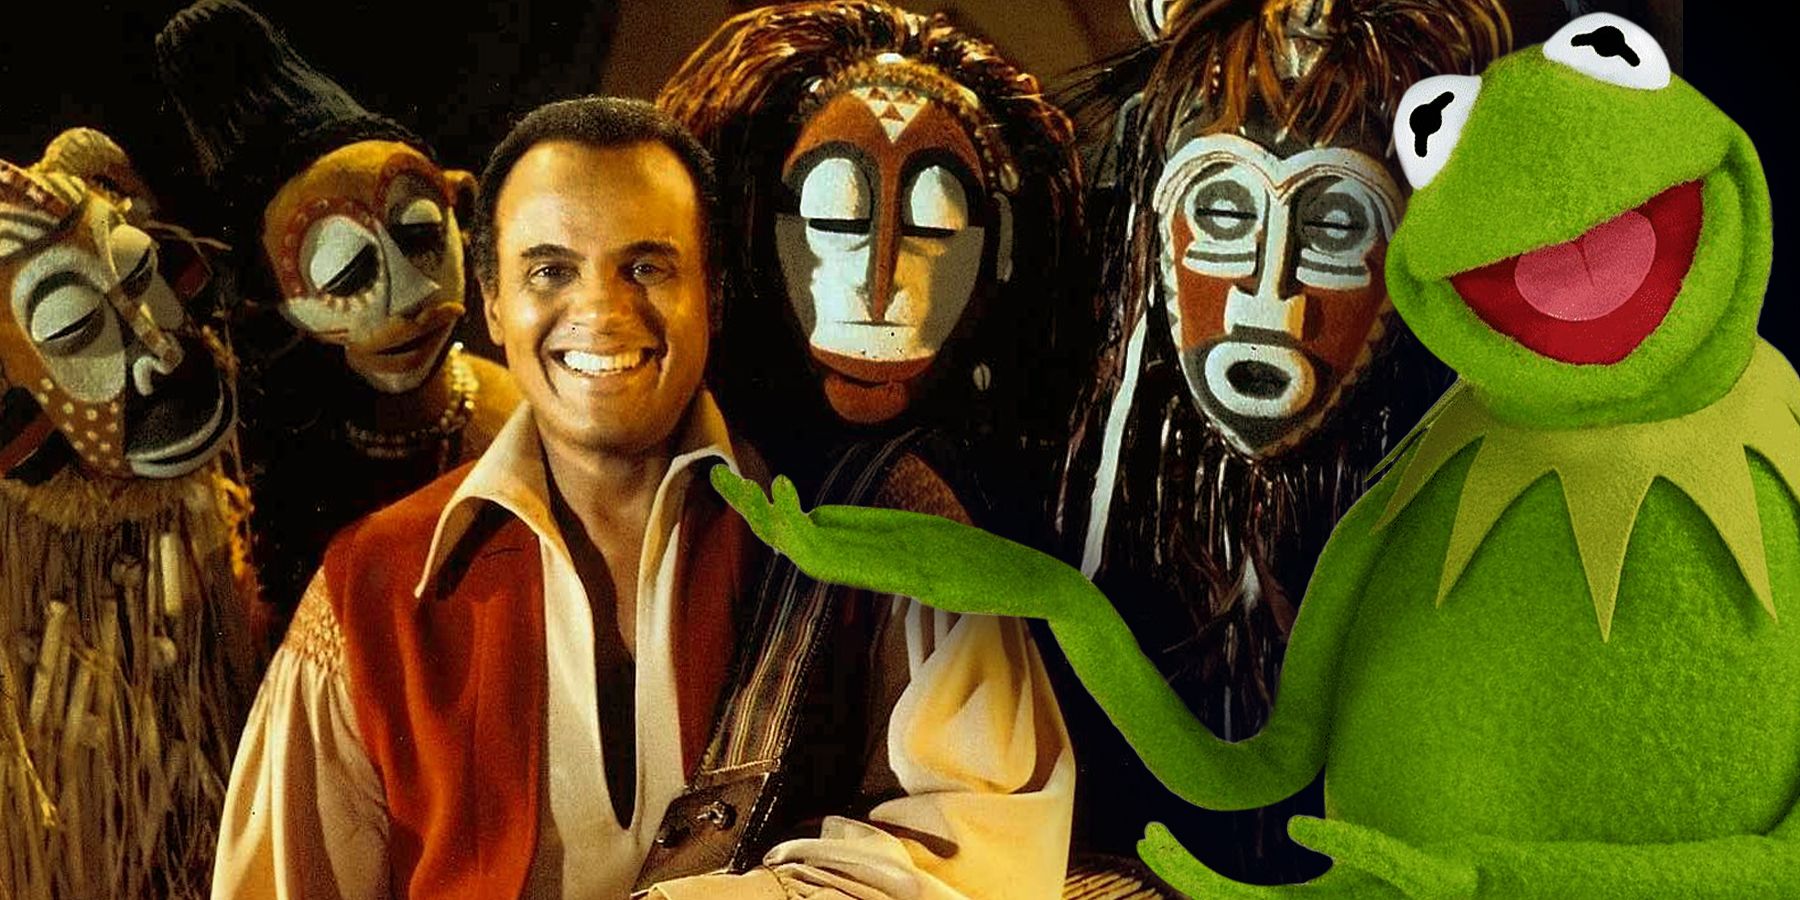 Hary Belafonte with cast from The Muppet Show